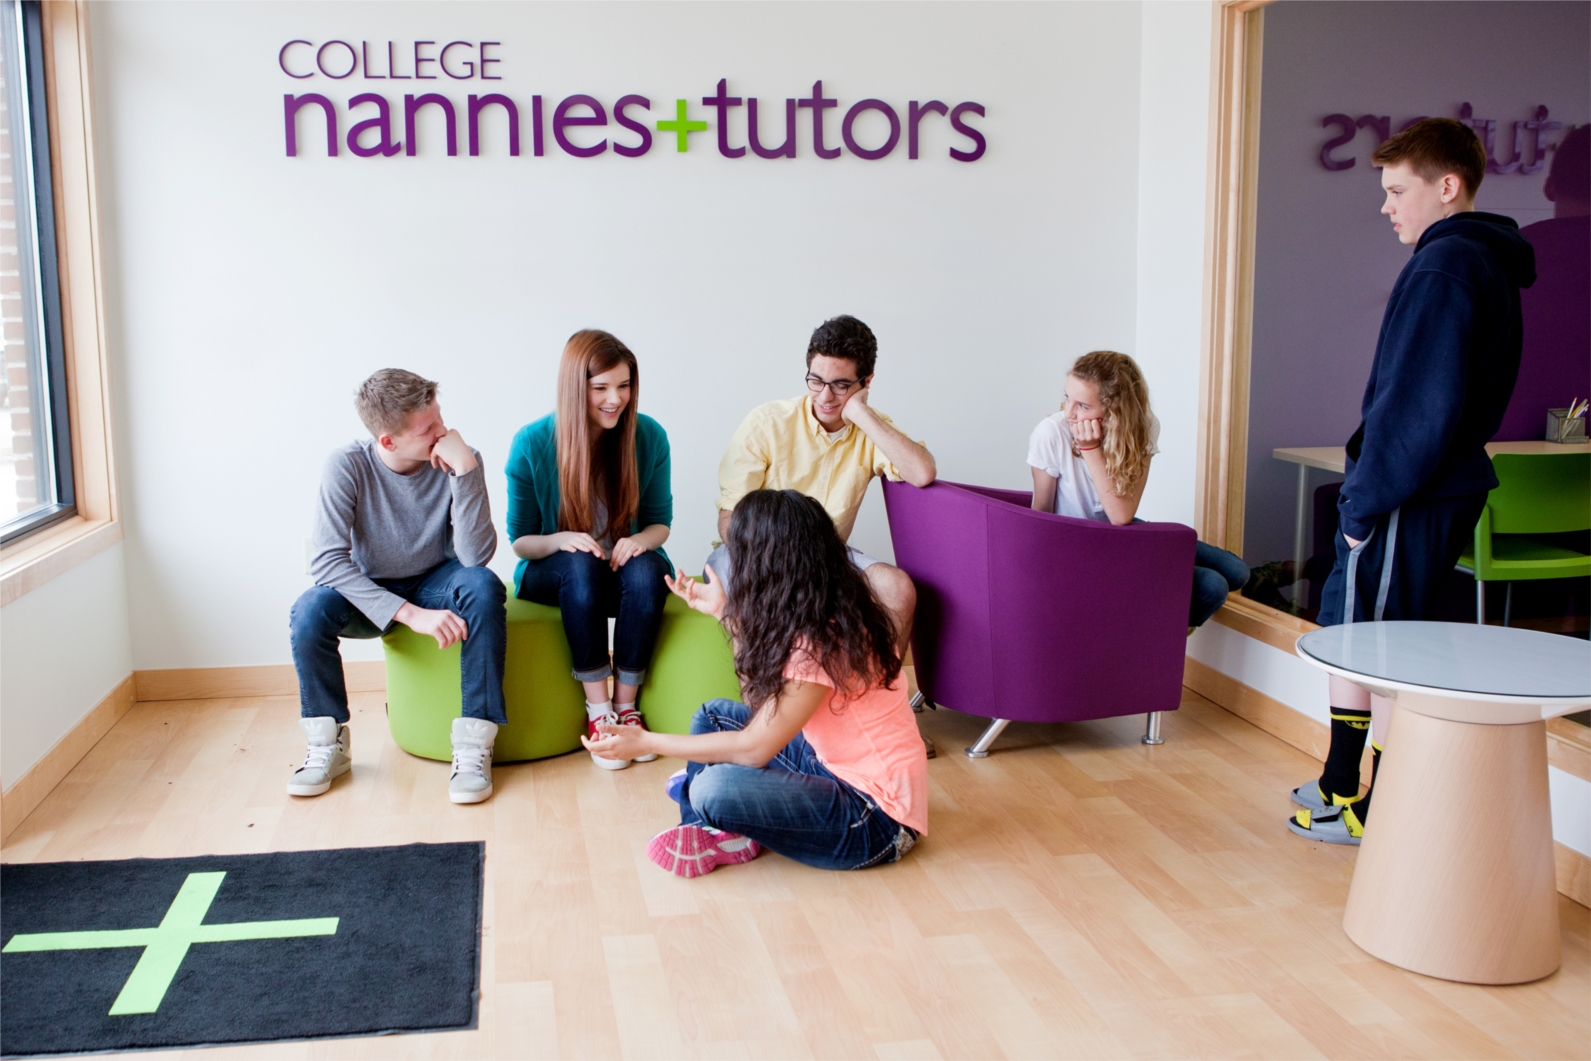 Students enjoying College Nannies + Tutors’ lobby hang-out area